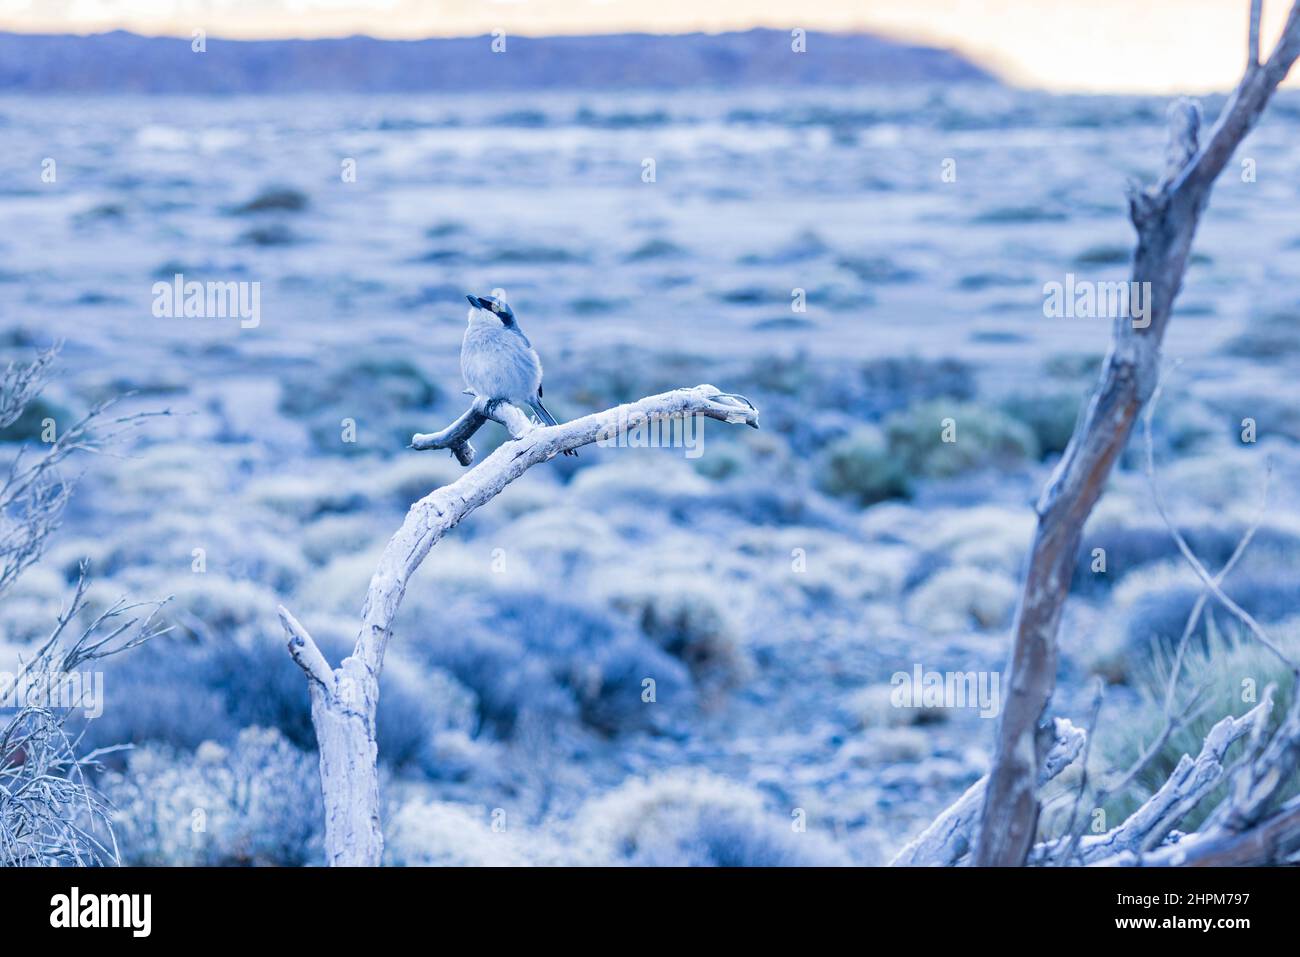 Lanius meridionalis koenigii, southern grey shrike, bird on a branch on a cold snowy morning in the Las Canadas del Teide National Park, Tenerife, Can Stock Photo